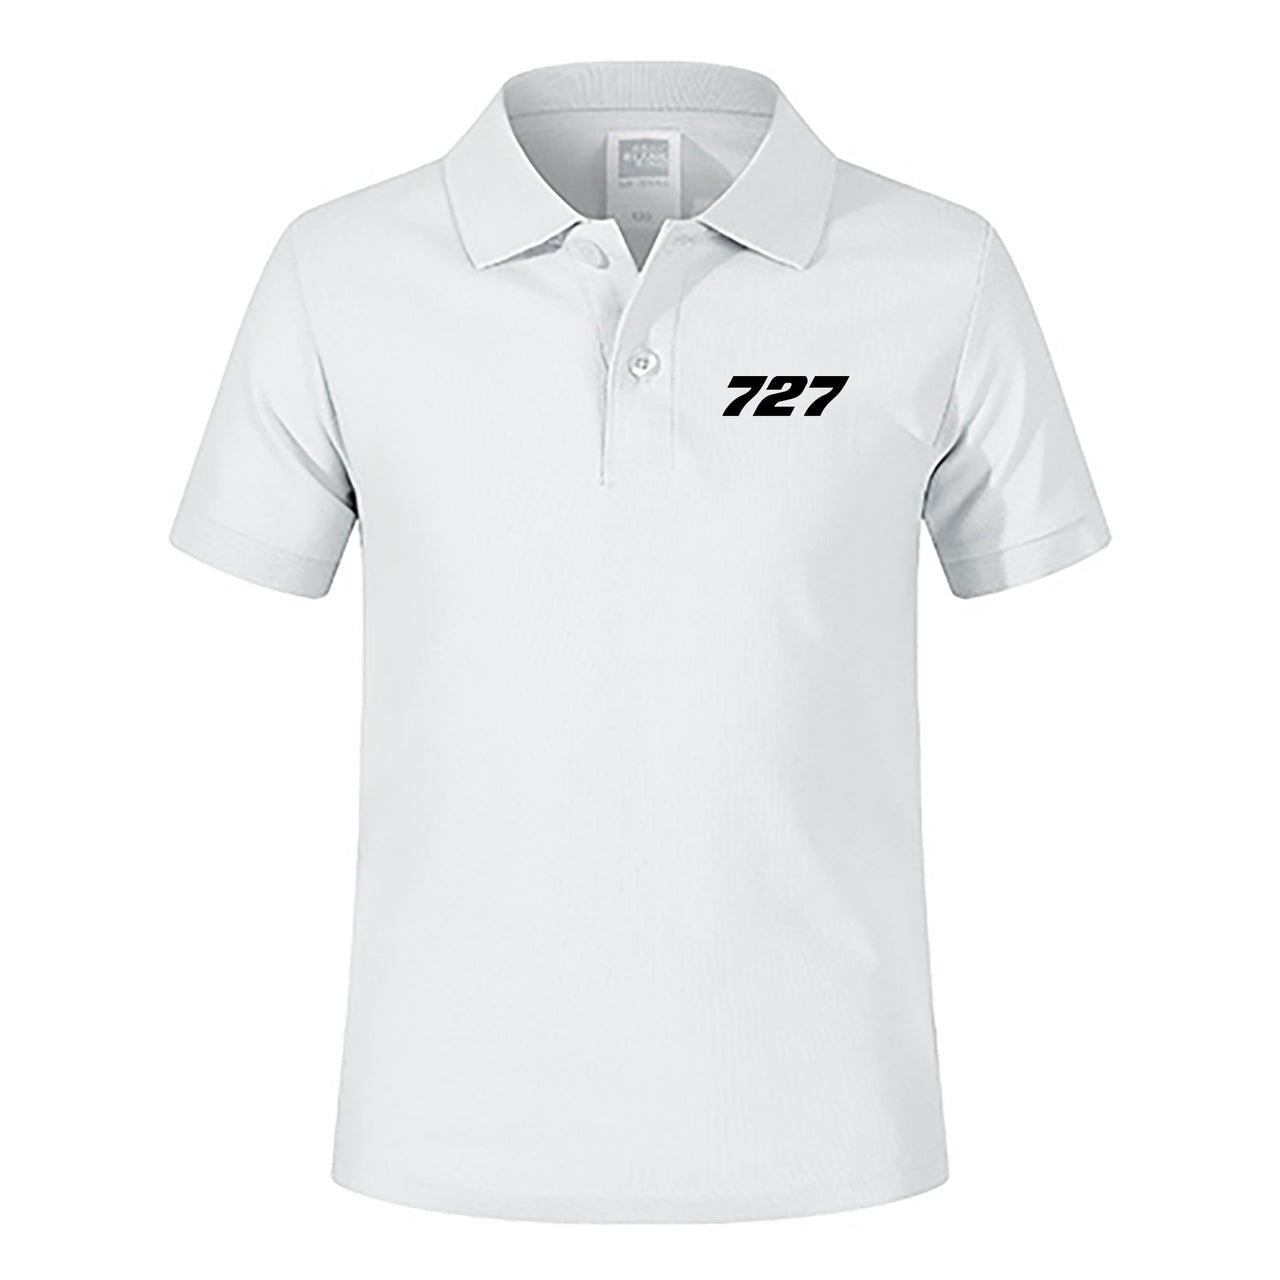 727 Flat Text Designed Children Polo T-Shirts